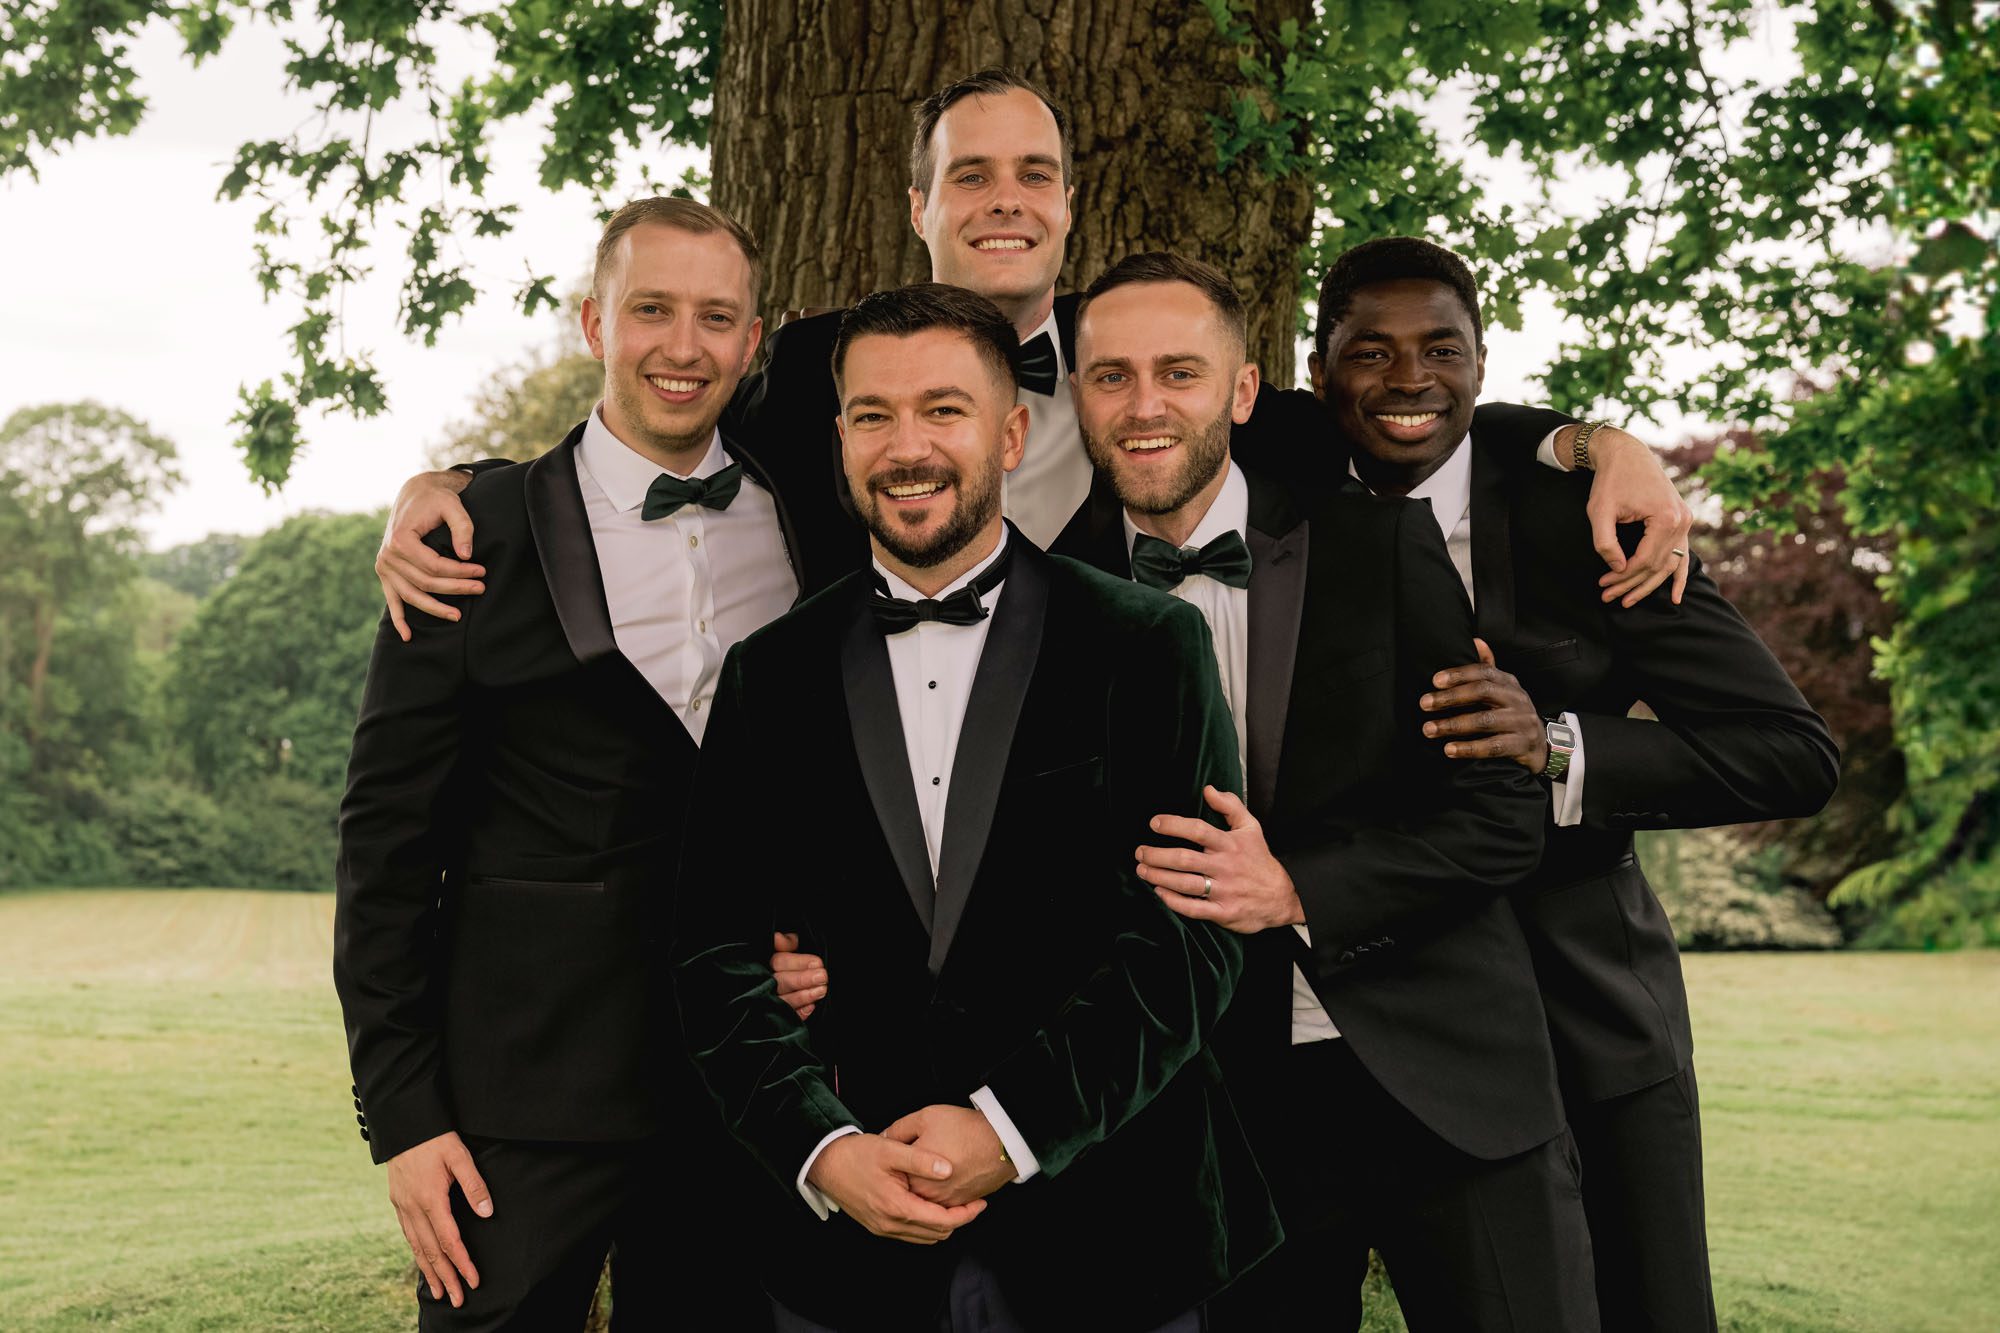 Group picture of the groom and his groomsmen at a wedding in Betchworth.